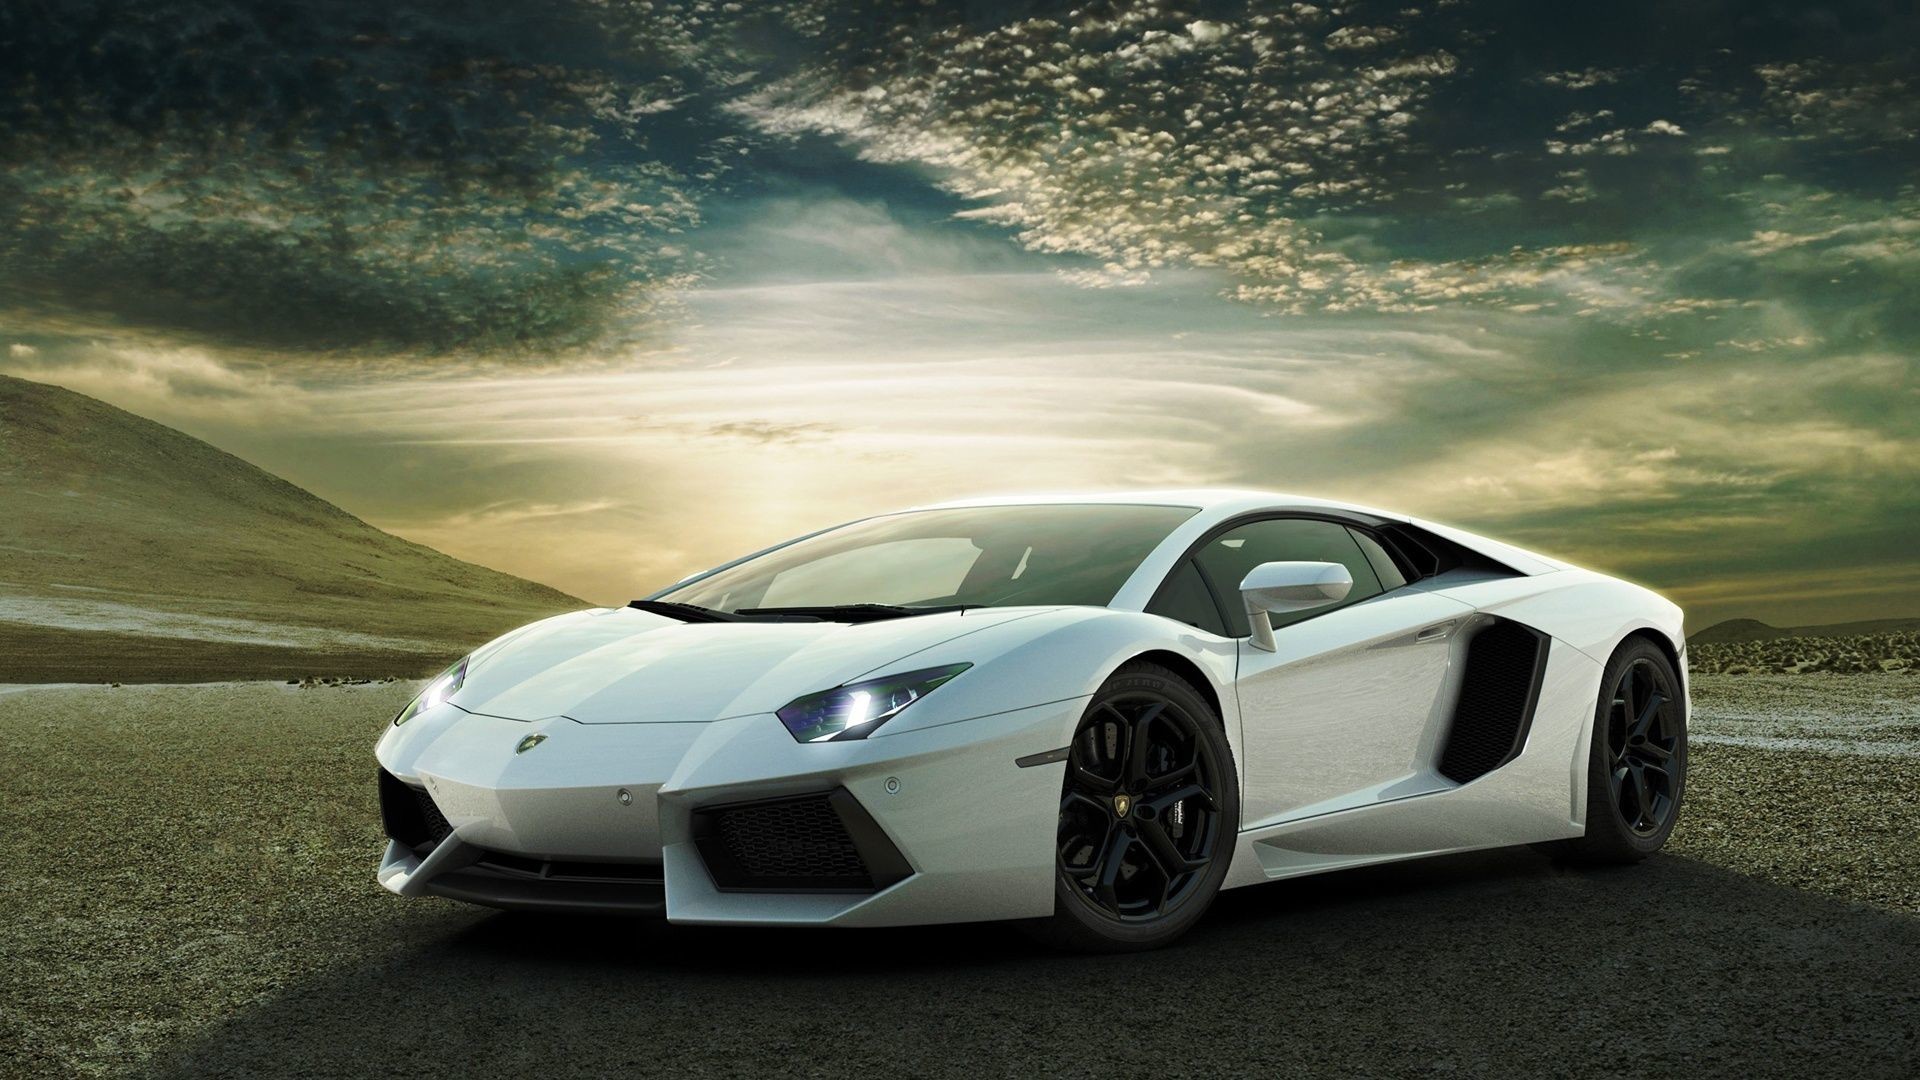 1920x1080 Aventador - HD Wallpapers 1080p Cars | HD Wallpapers Source